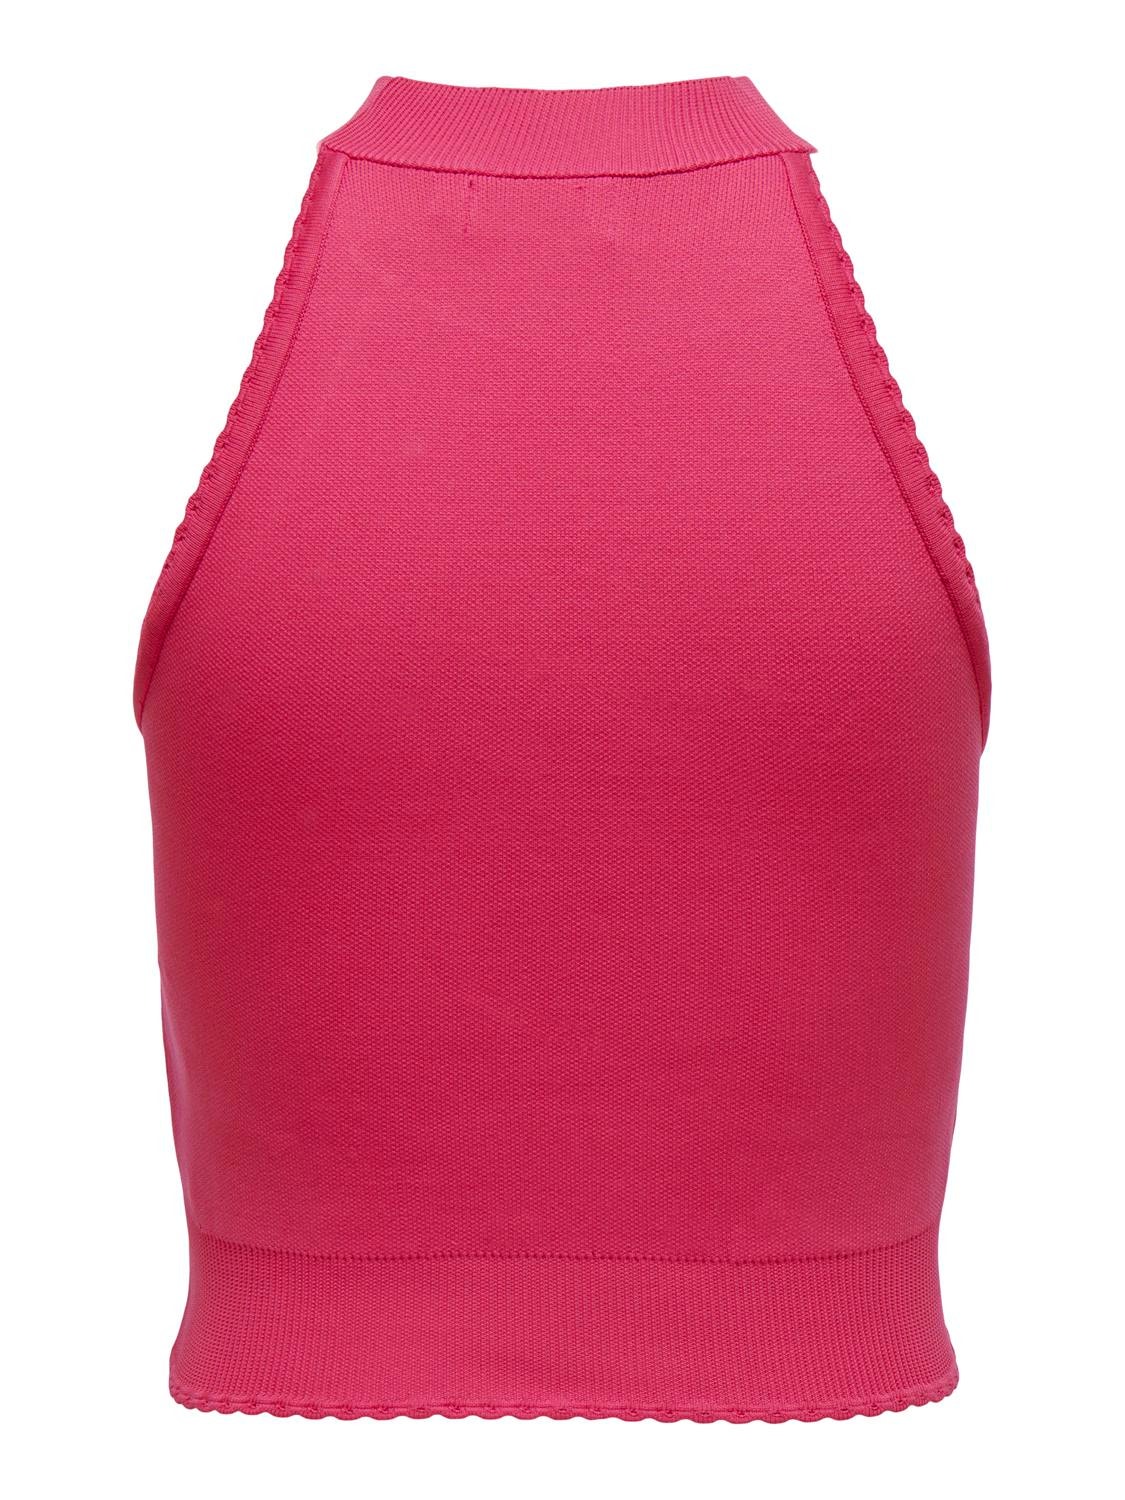 ONLY Top Regular Fit Dos nu -Strawberry Moon - 15314741